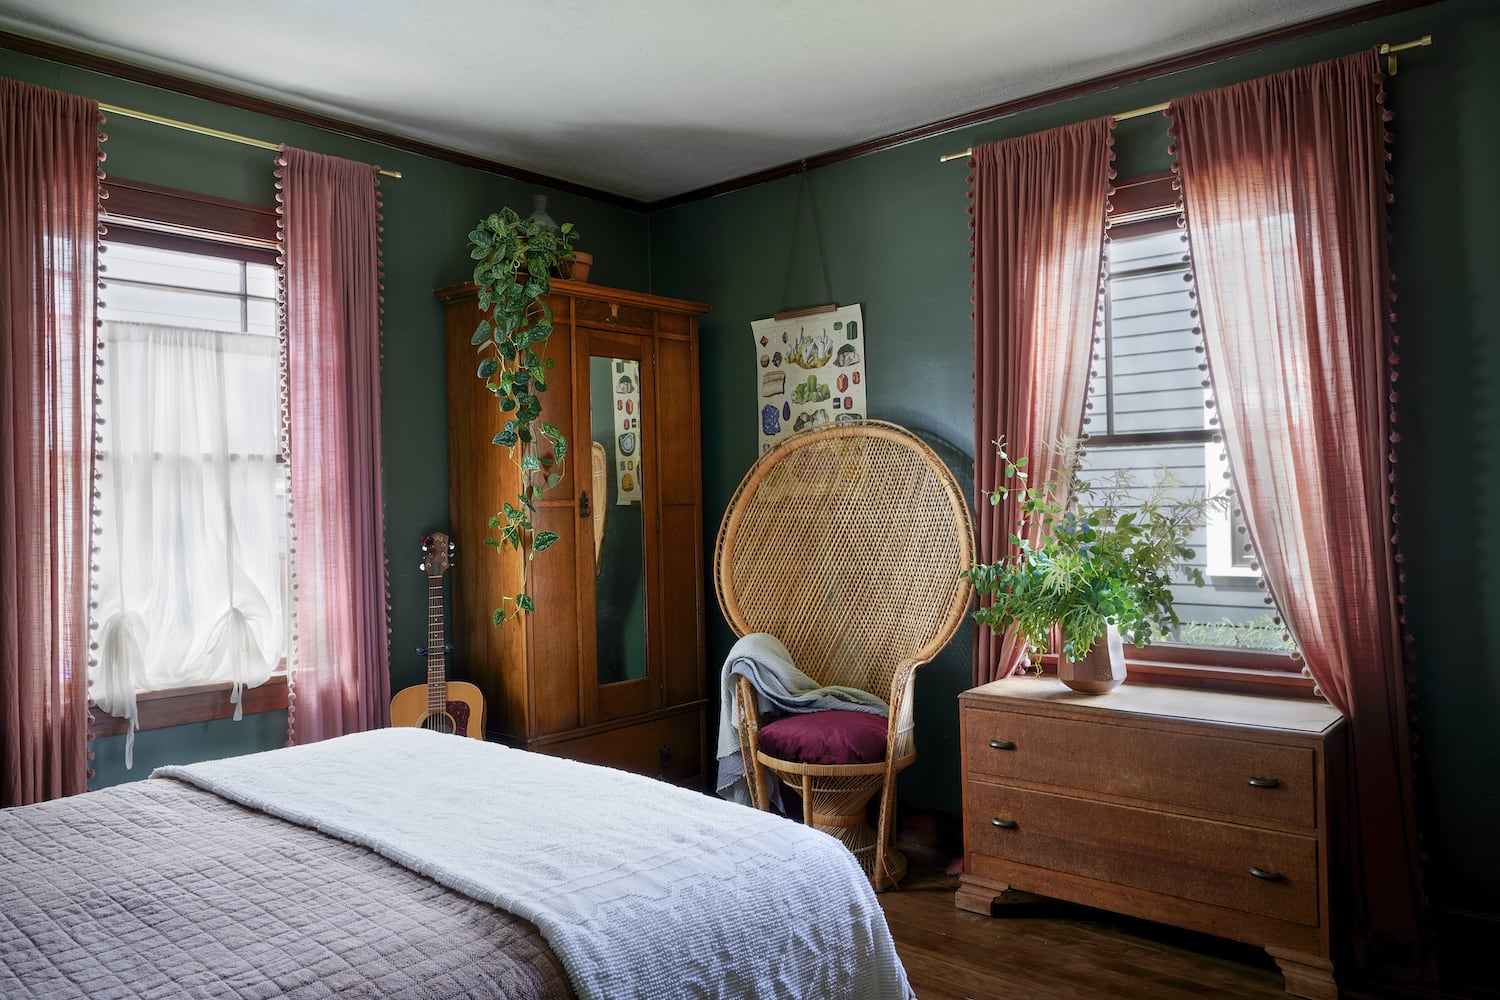 Portland bedroom with green walls, red curtains, wicker peacock chair